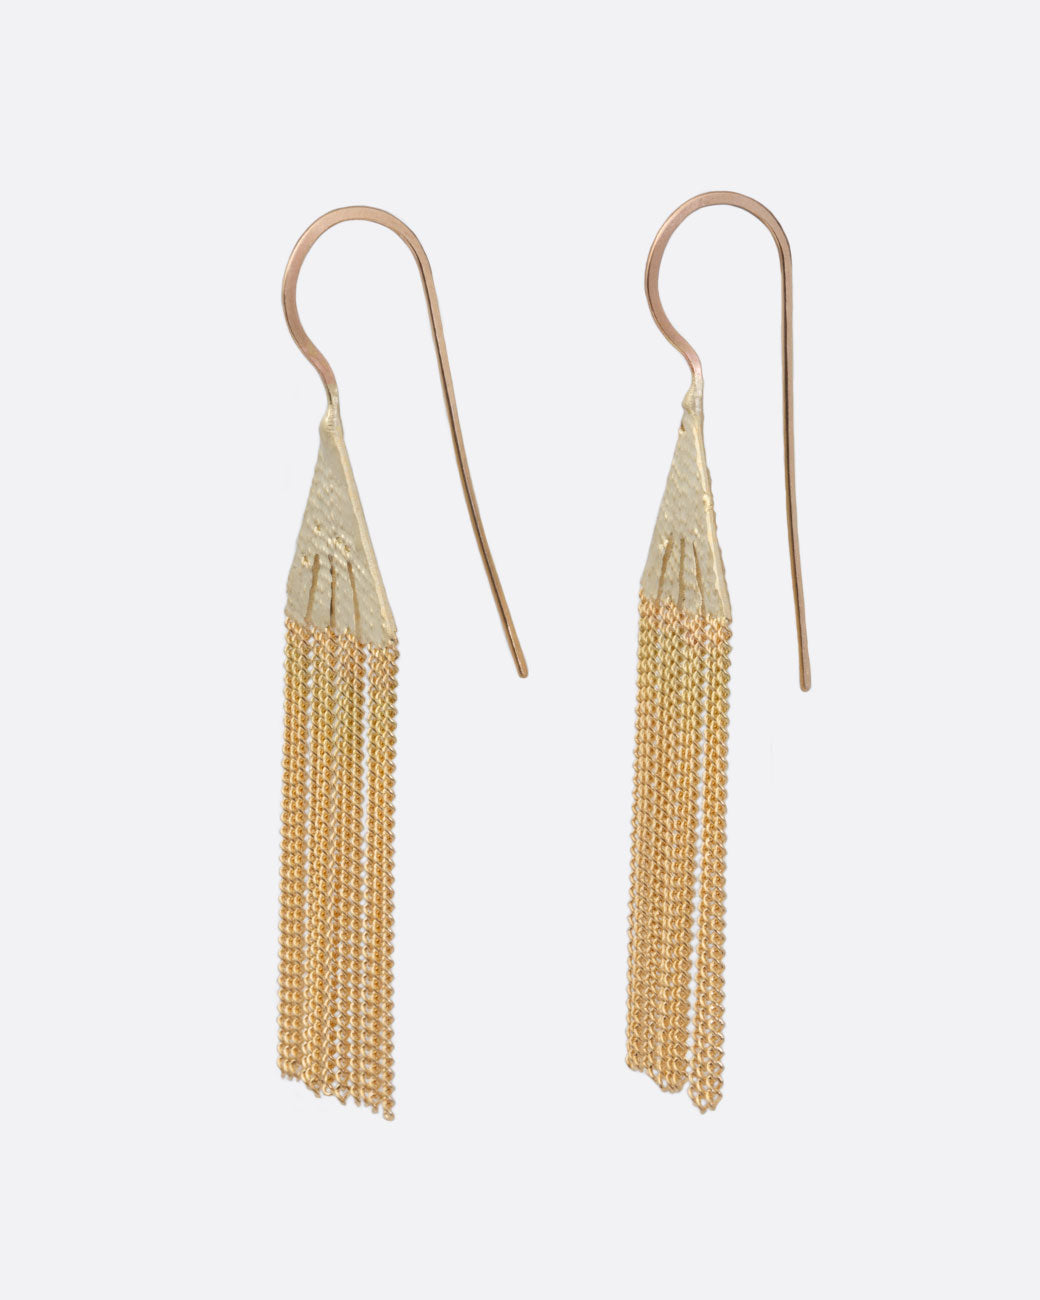 18k yellow gold icicle chain earrings by Hannah Keefe, shown from the side.